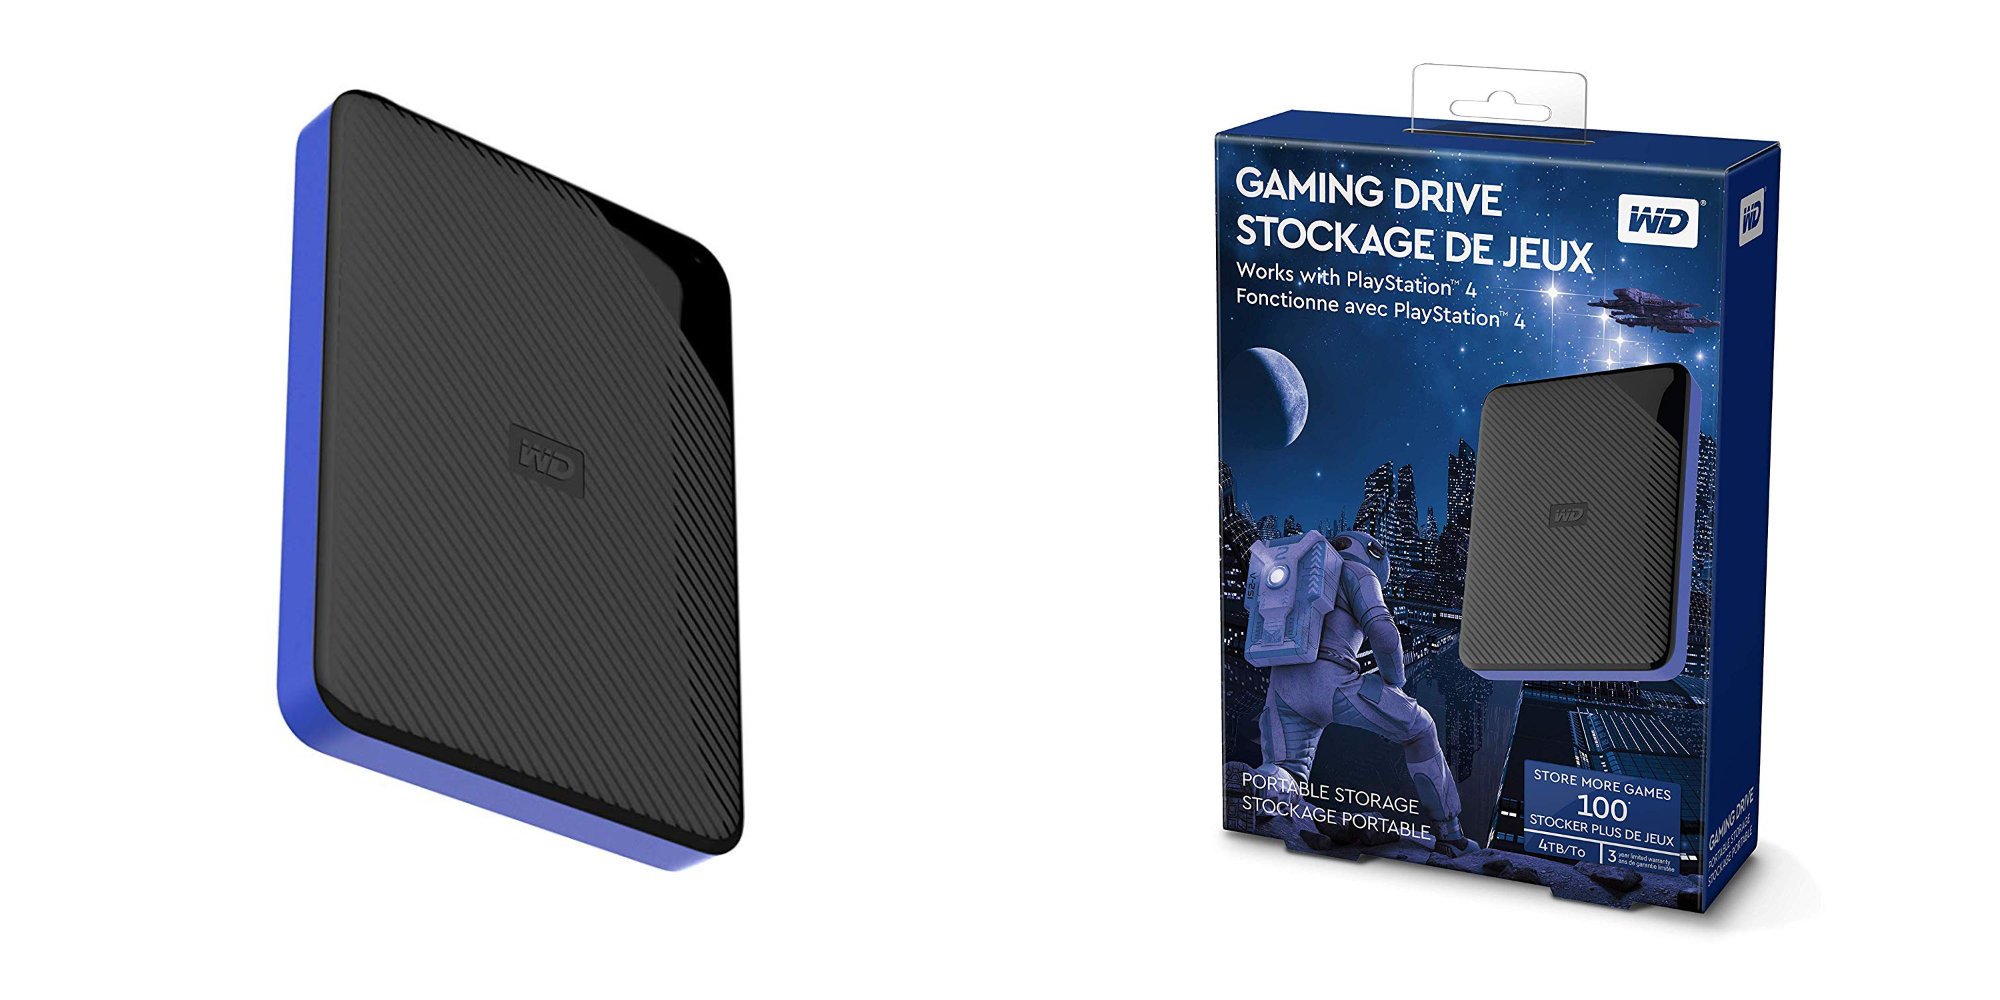 WD Gaming Drive 4tb. WD games. WD game backpicture. Как сайднит игровой WD 184. Wd game drive